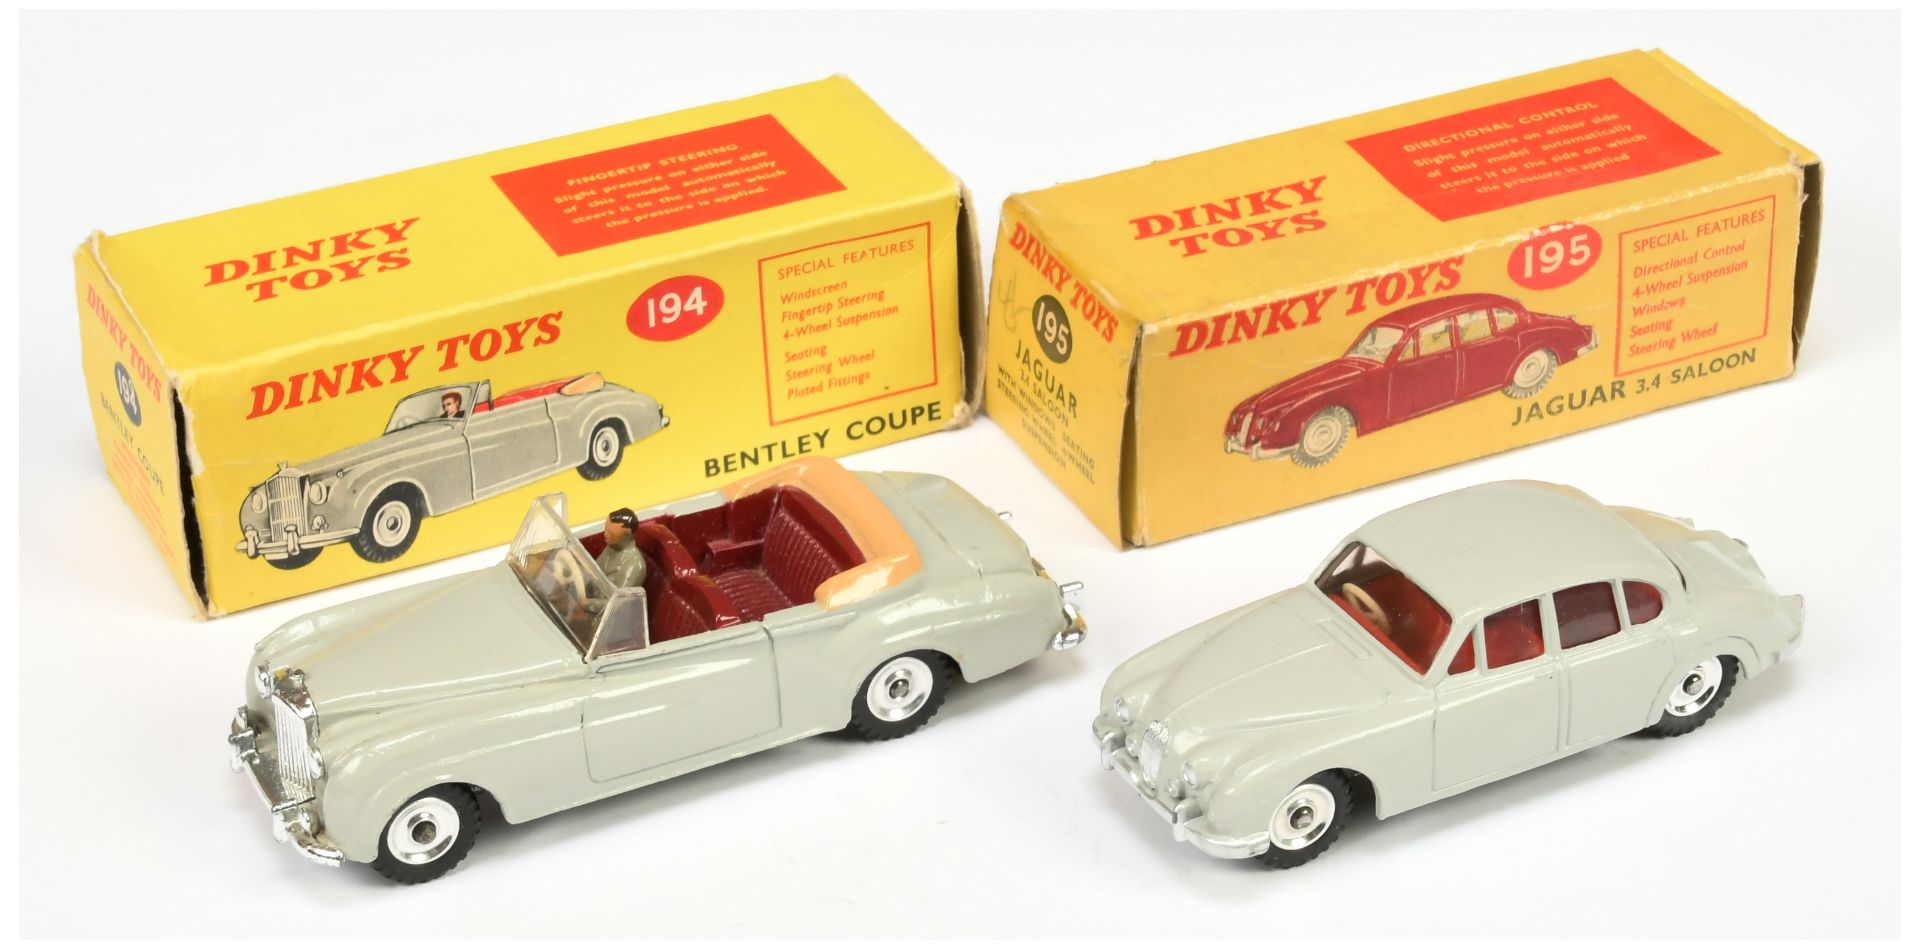 Dinky Toys 194 Bentley Coupe - Grey body, maroon interior with figure, chrome trim and spun hubs ...